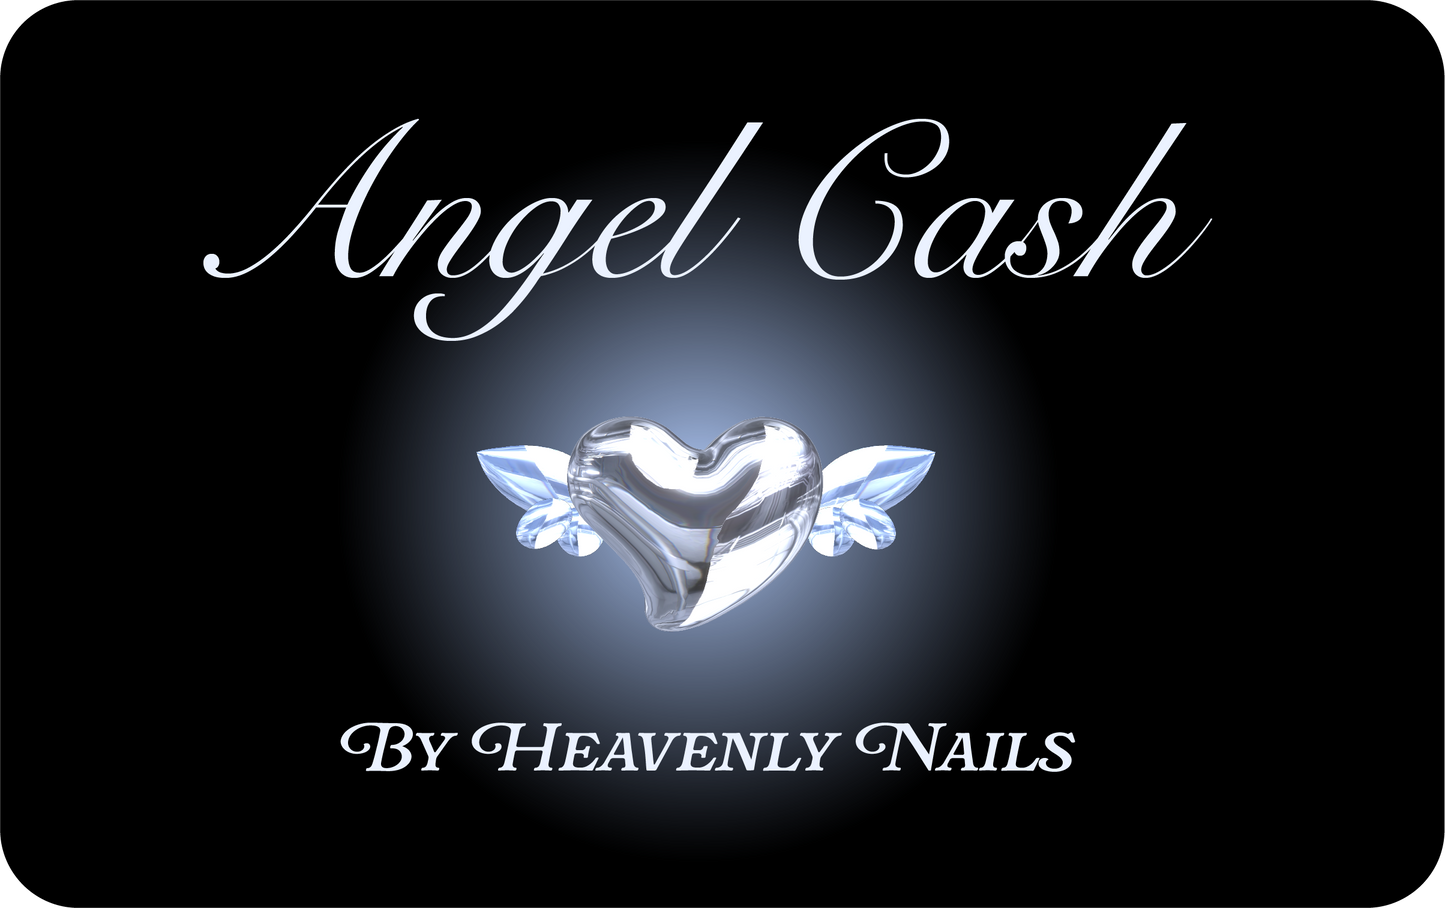 Heavenly E-Gift Cards